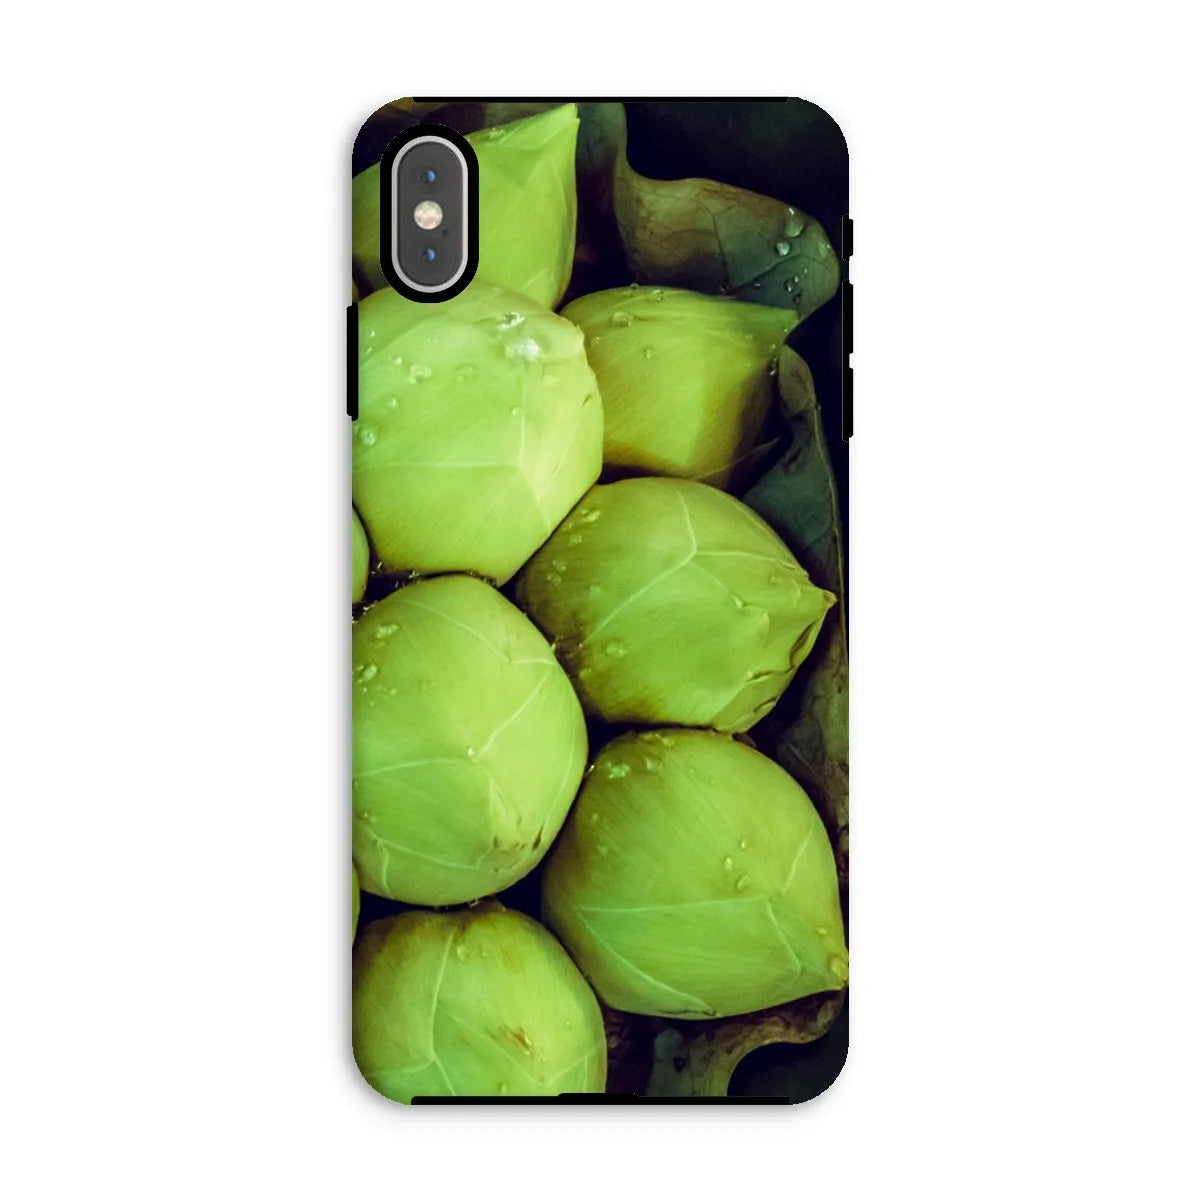 Ingenues Tough Phone Case - Iphone Xs Max / Matte - Mobile Phone Cases - Aesthetic Art